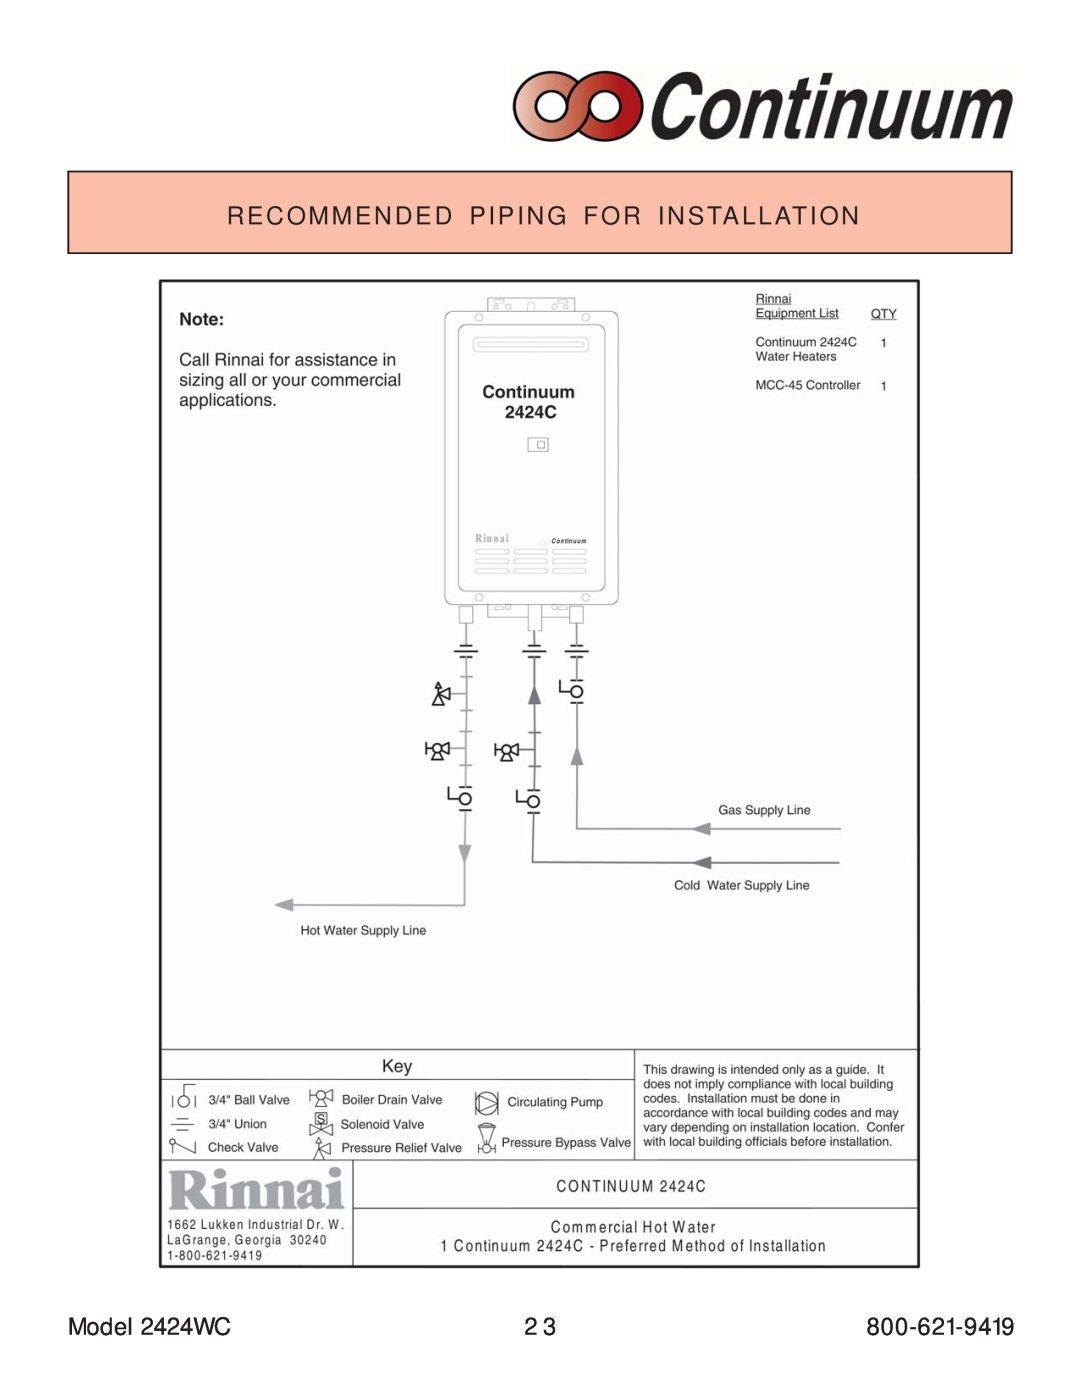 Rinnai manual Recommended Piping For Installation, Model 2424WC 